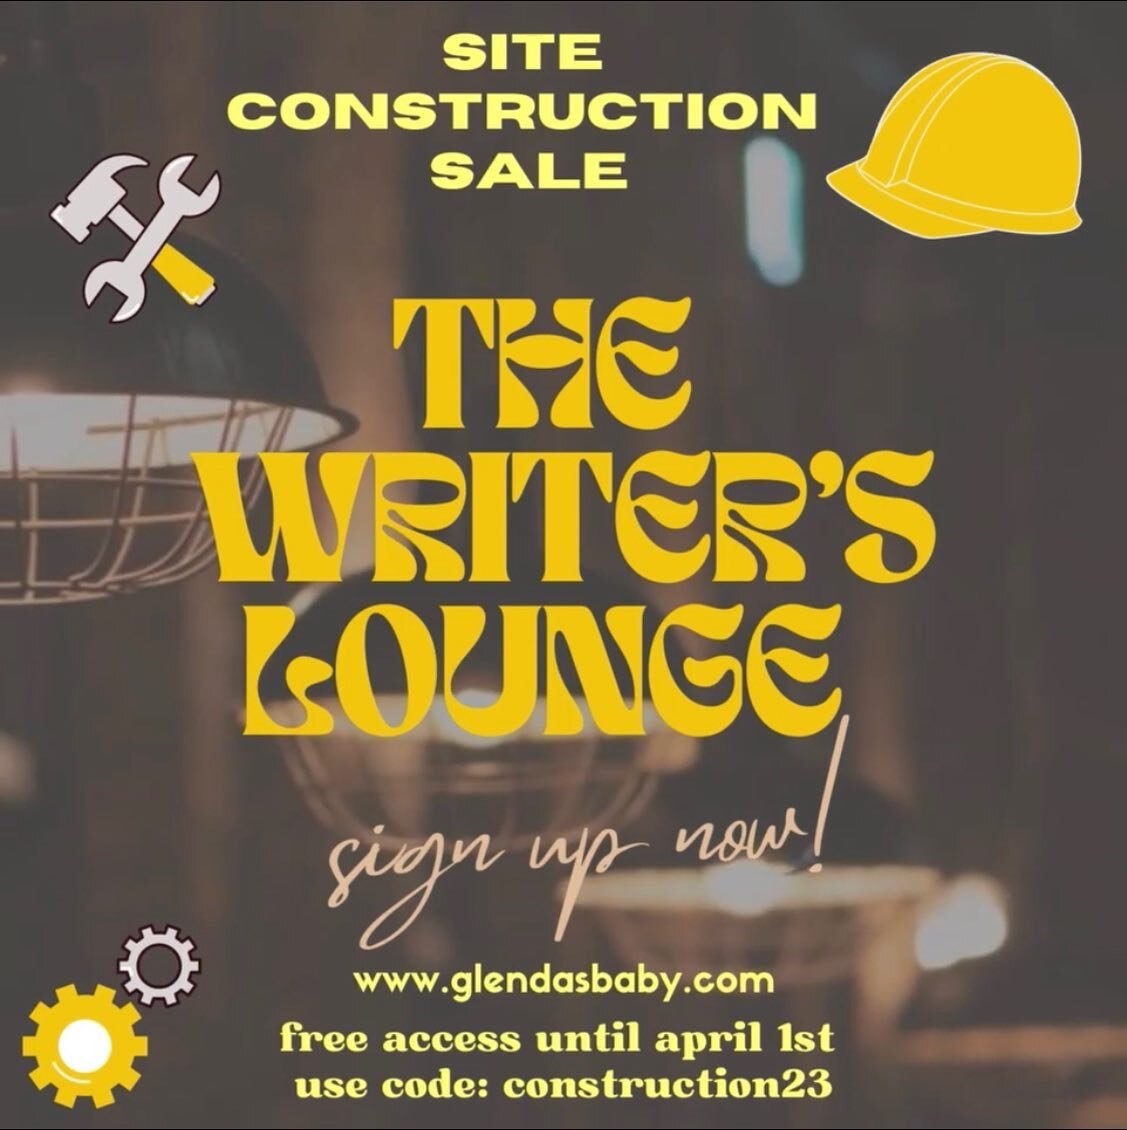 Just a few more days left of this sale! Get free access for your first month of membership. The Writer&rsquo;s Lounge is GB Pro&rsquo;s creative community. We have virtual and in-person programming, discounted services, members only merch, job boards